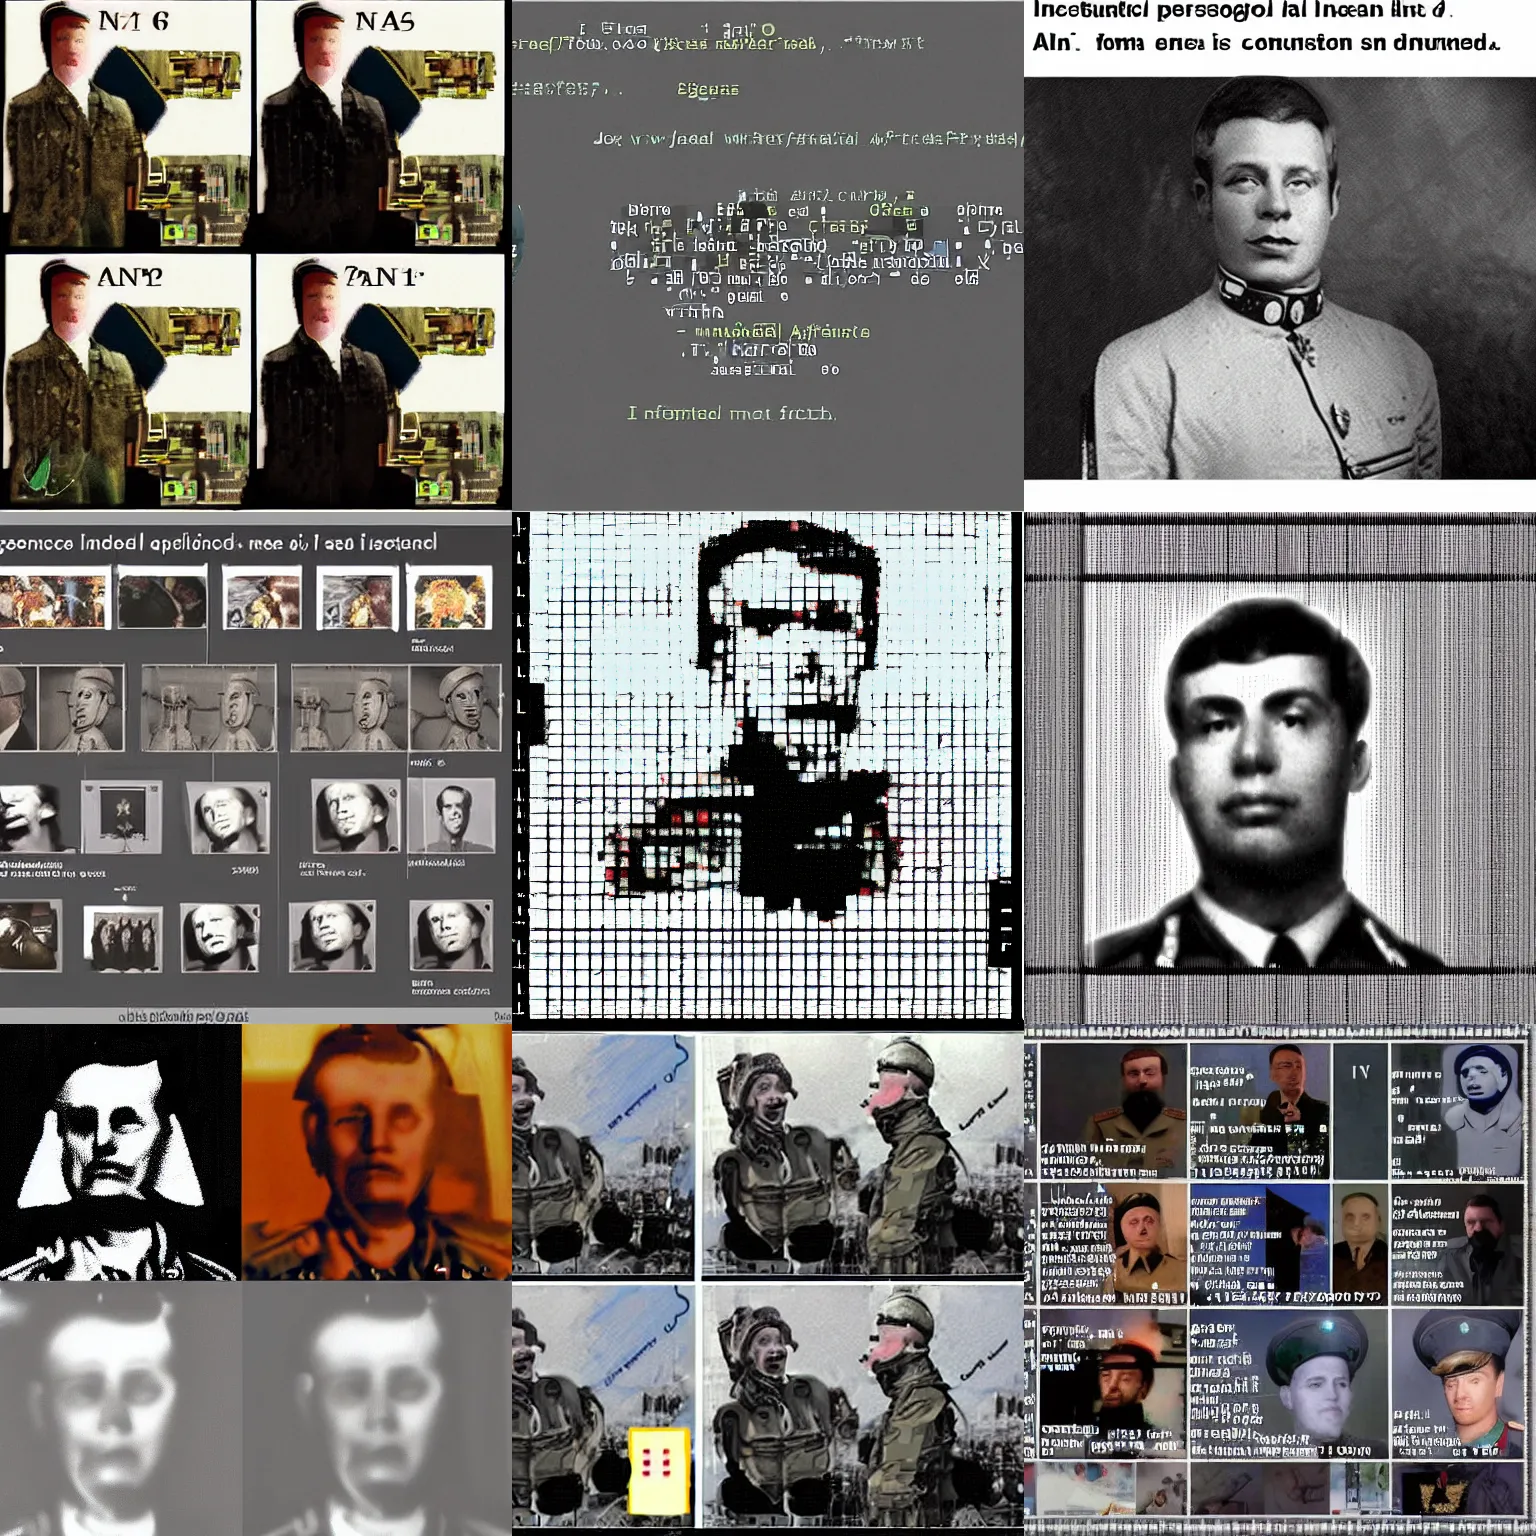 Prompt: I'm using Artificial intelligence to generate images to express my profound loss Special operation Comrade, Maybe this will help me through it, time has not